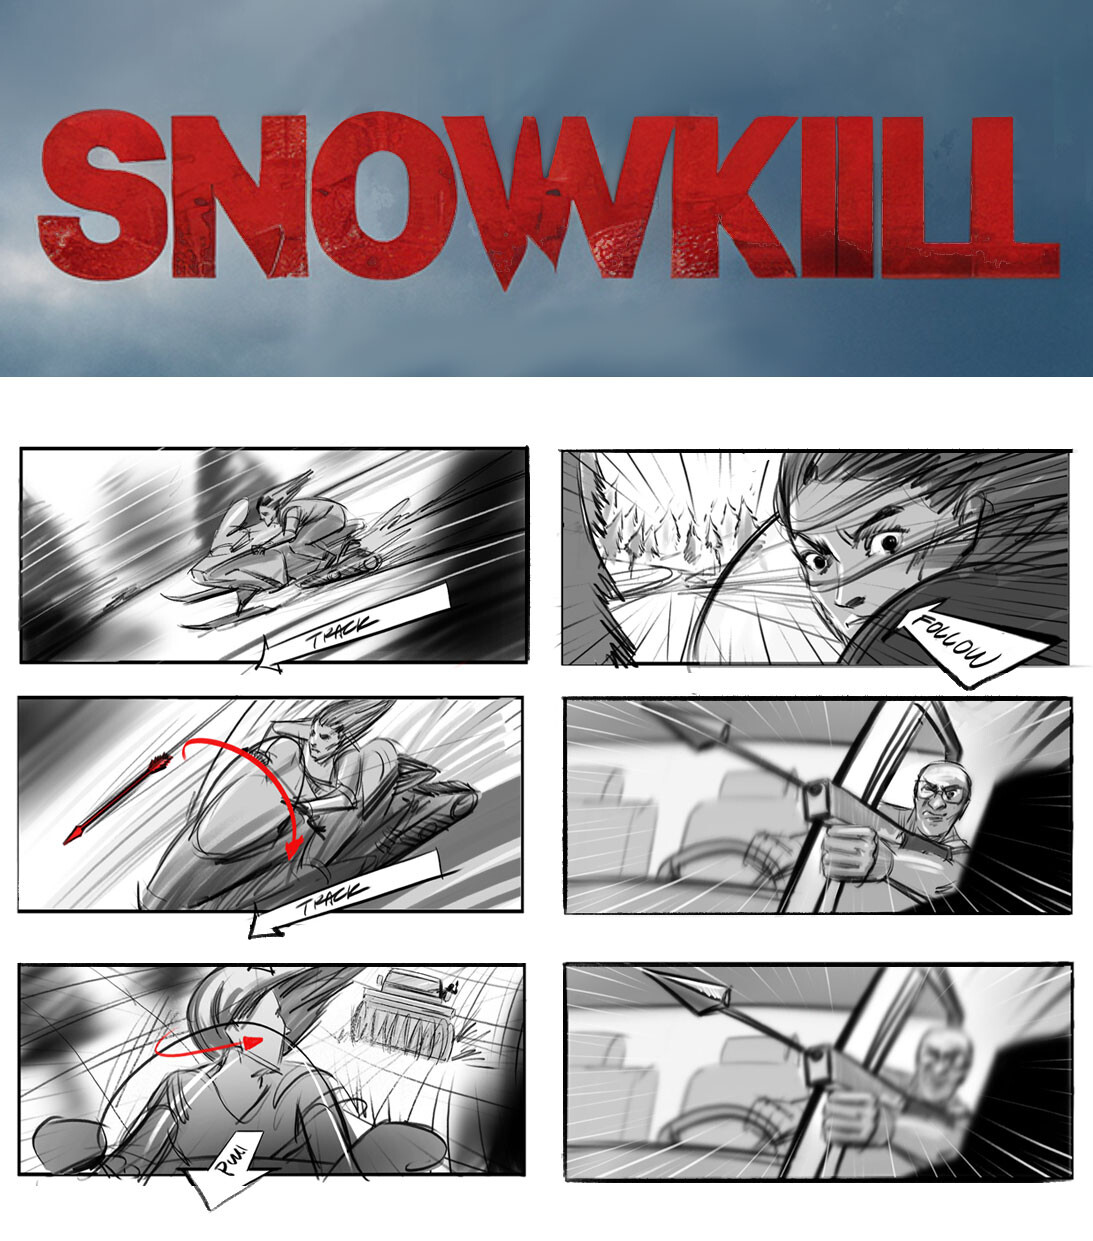 SNOWKILL CHASE SEQUENCE